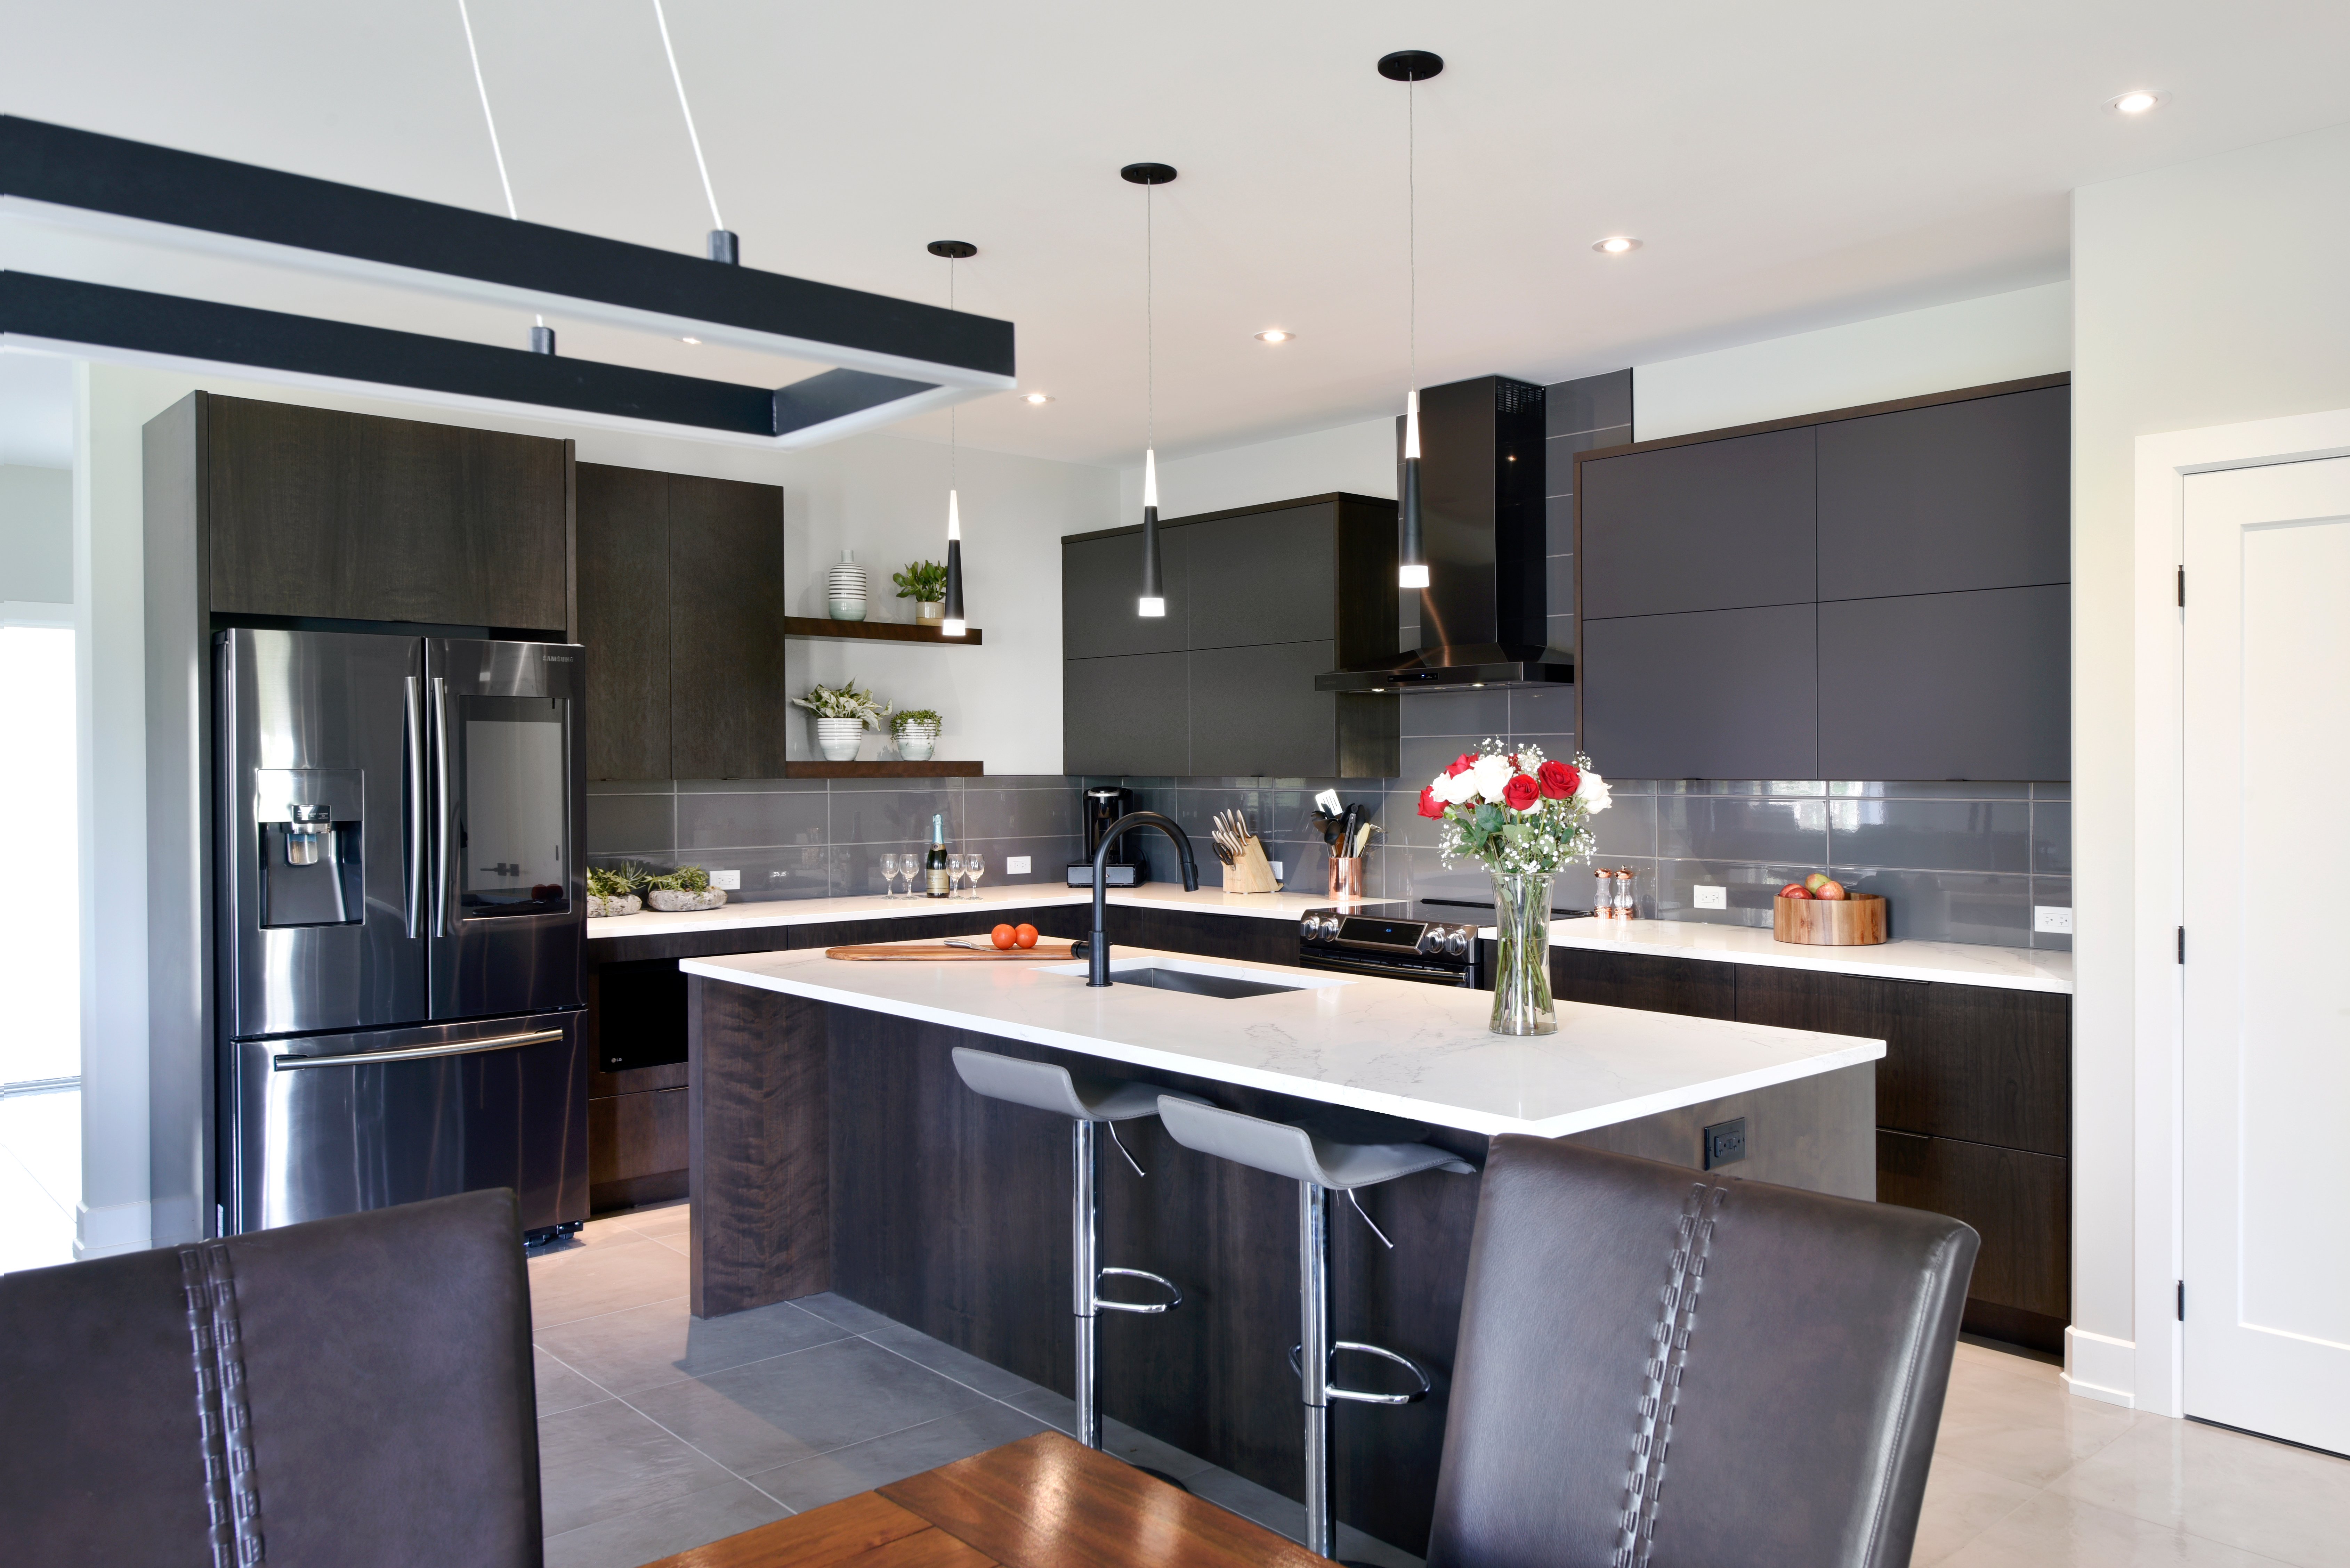 How to design a functional and aesthetic kitchen that fits your lifestyle